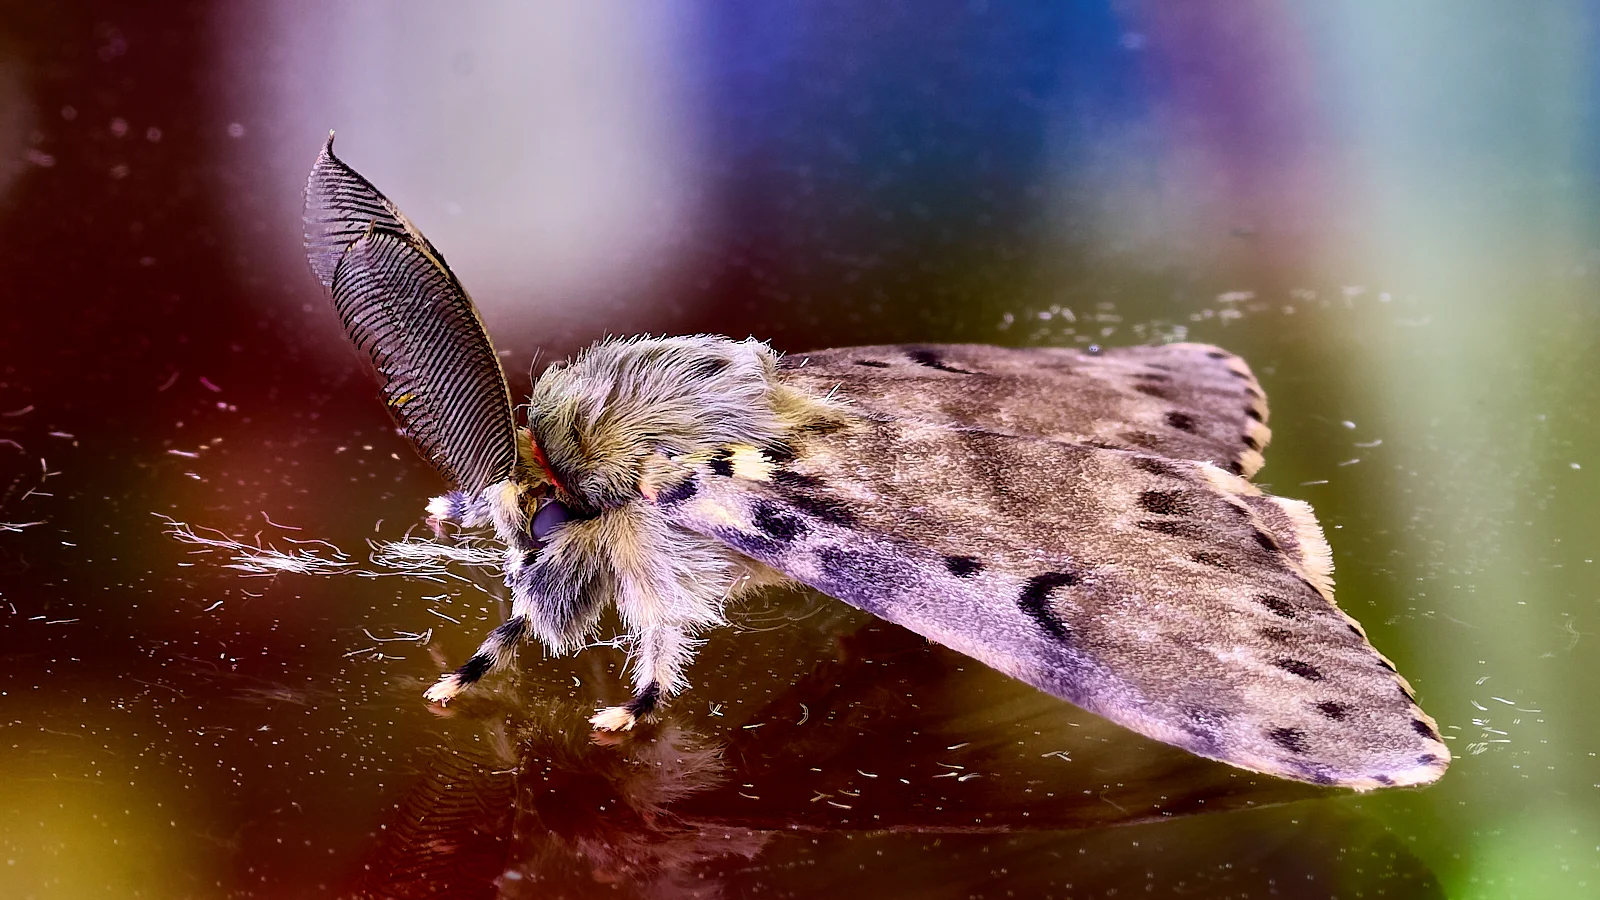 A beautiful and glopriously colored moth siting on one of our glass walls.